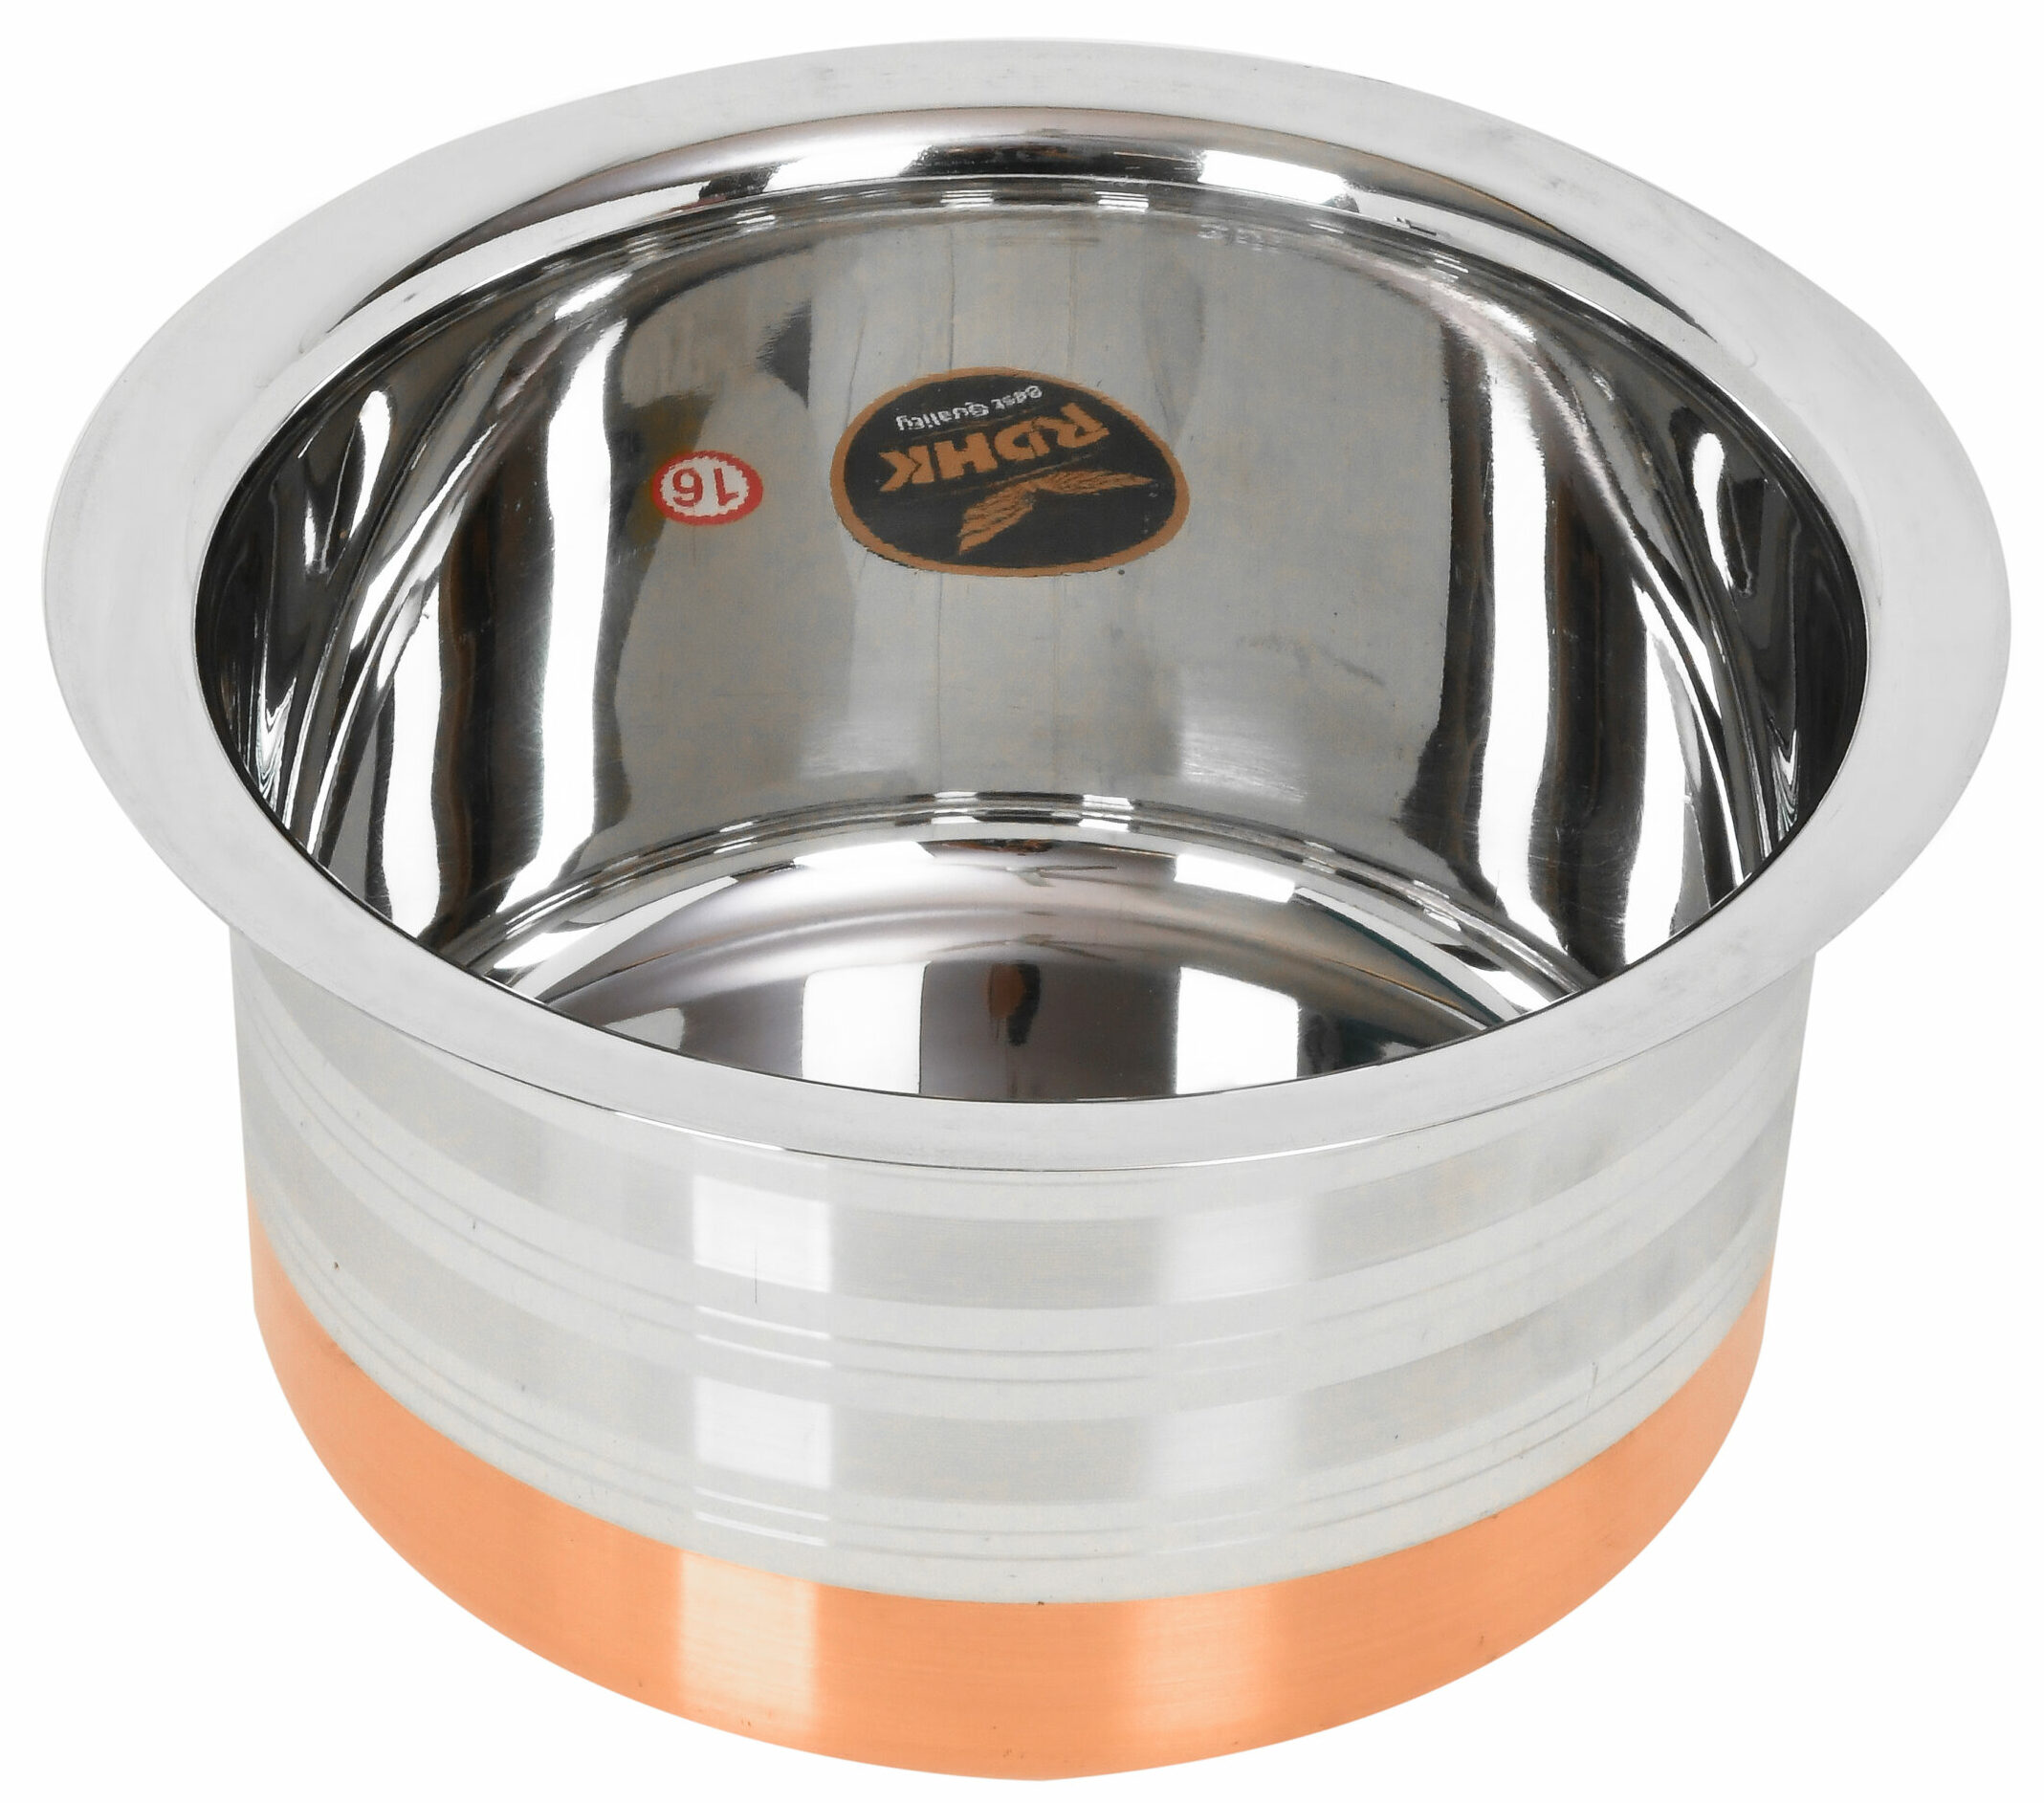 Stainless Steel Copper Base Patila 16 No